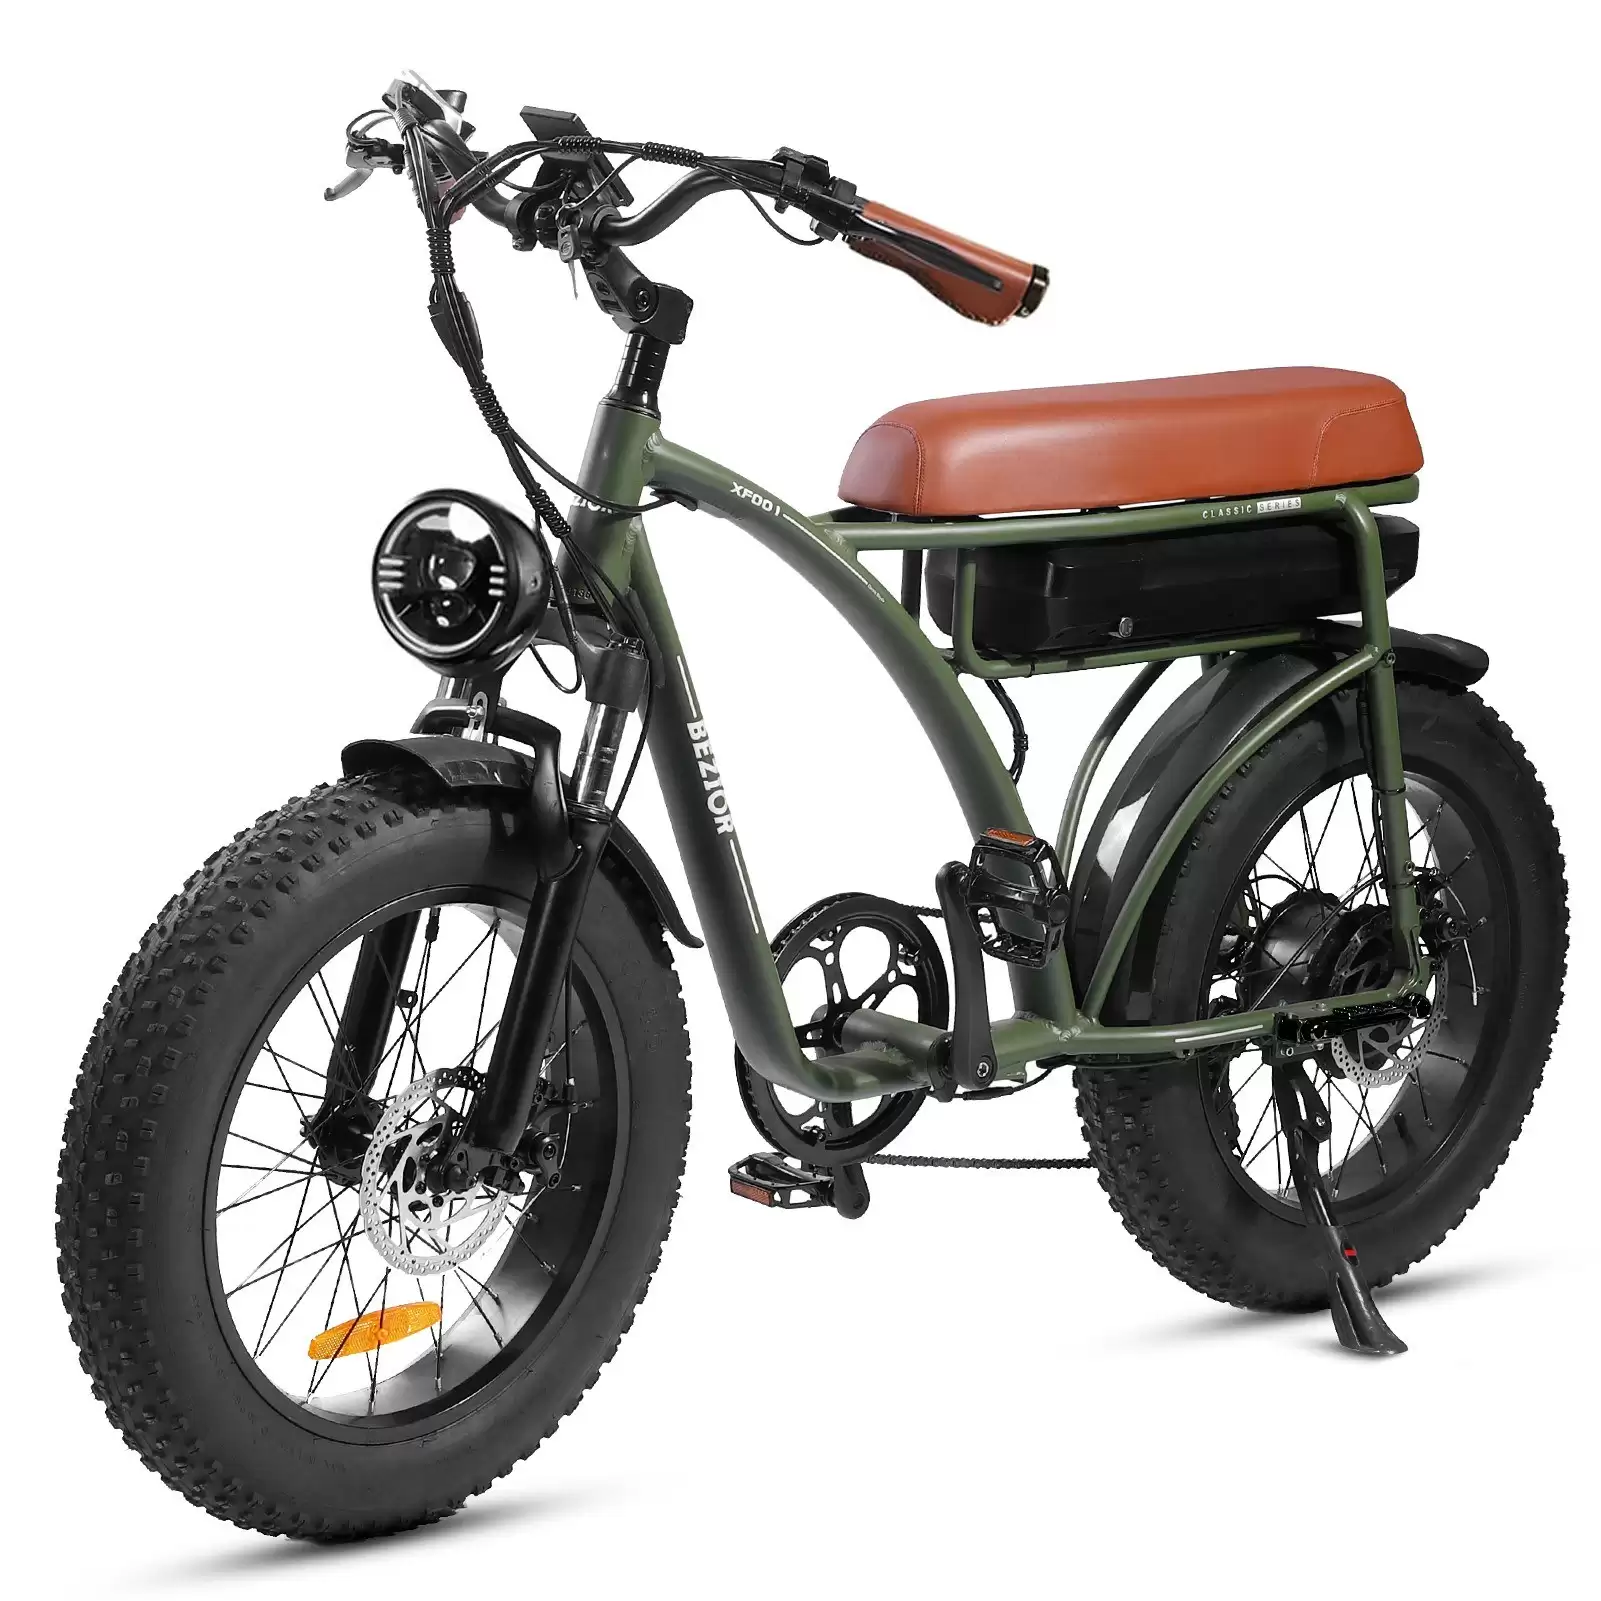 Order In Just $1029.98 Bezior Xf001 Electric Bike 48v 1000w 12.5ah Battery Max Speed 45km/h With This Discount Coupon At Tomtop